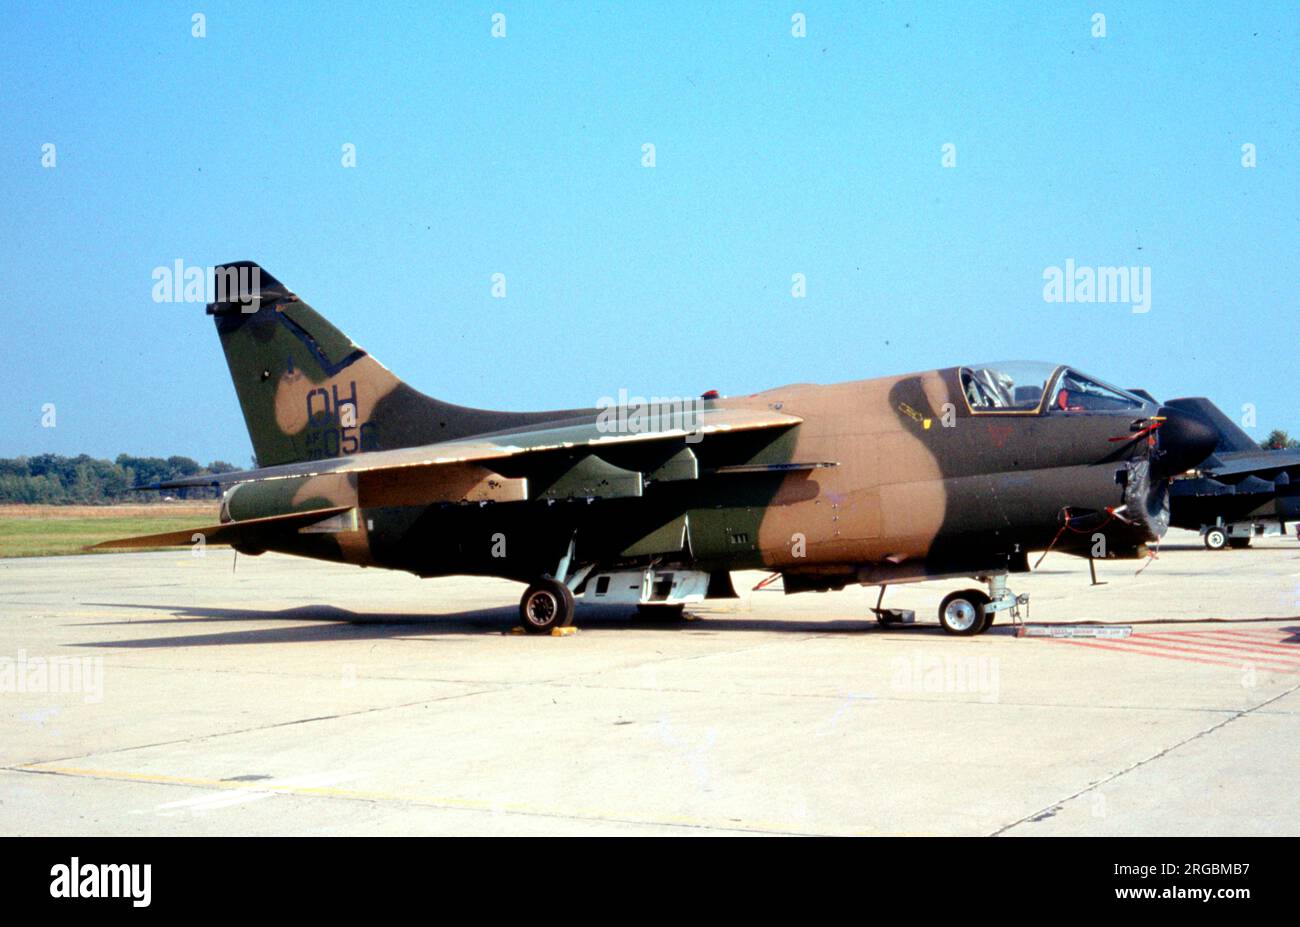 United States Air Force (USAF) - Ling-Temco-Vought A-7D-9-CV Corsair II 70-1056 (nsn D-202, Basiscode 'OH') der Ohio ANG, 162. TFS (178. TFG). Stockfoto